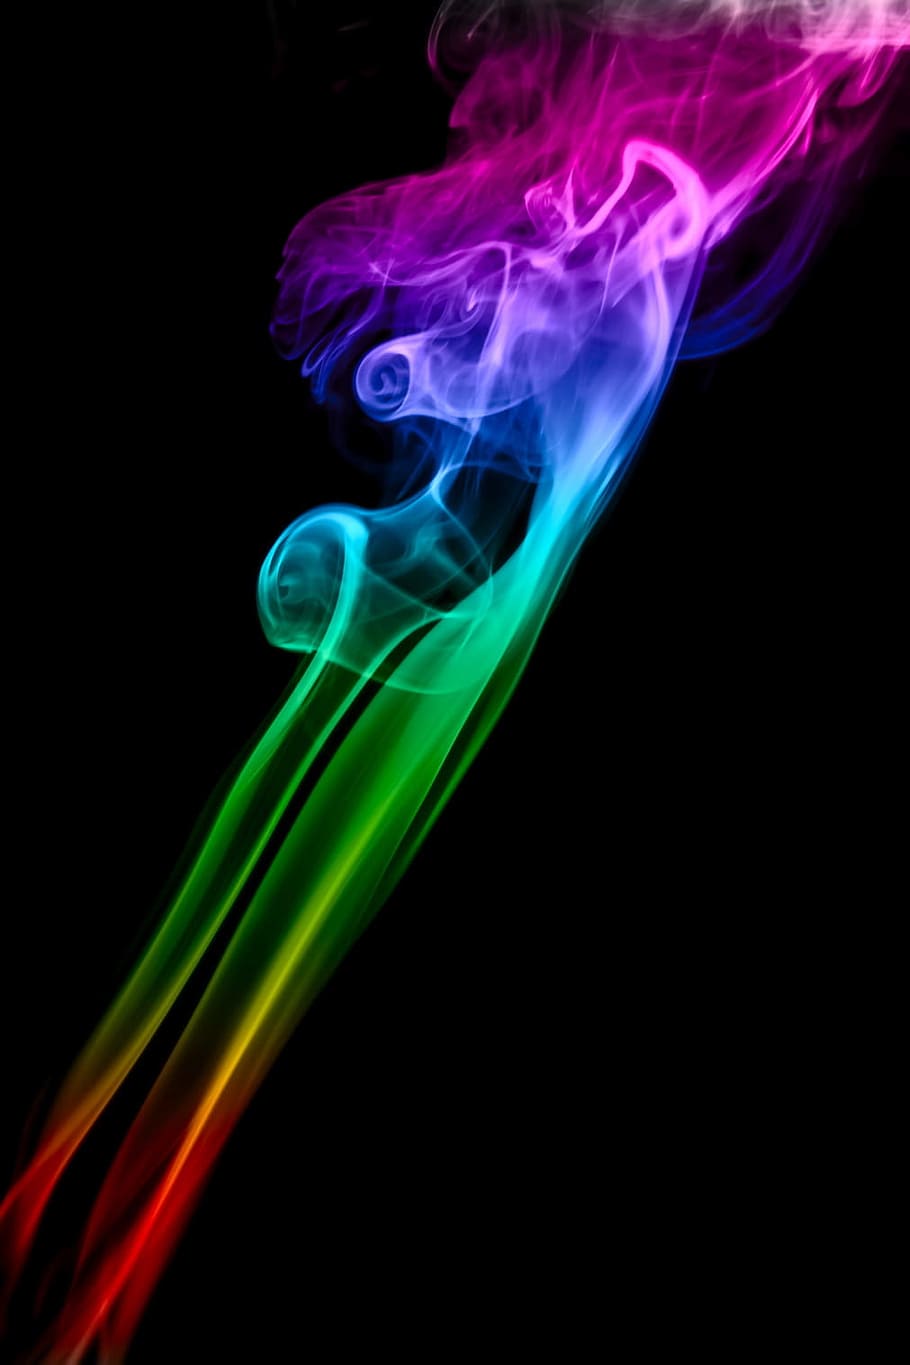 background, smoke, isolated, black, smooth, shape, abstract